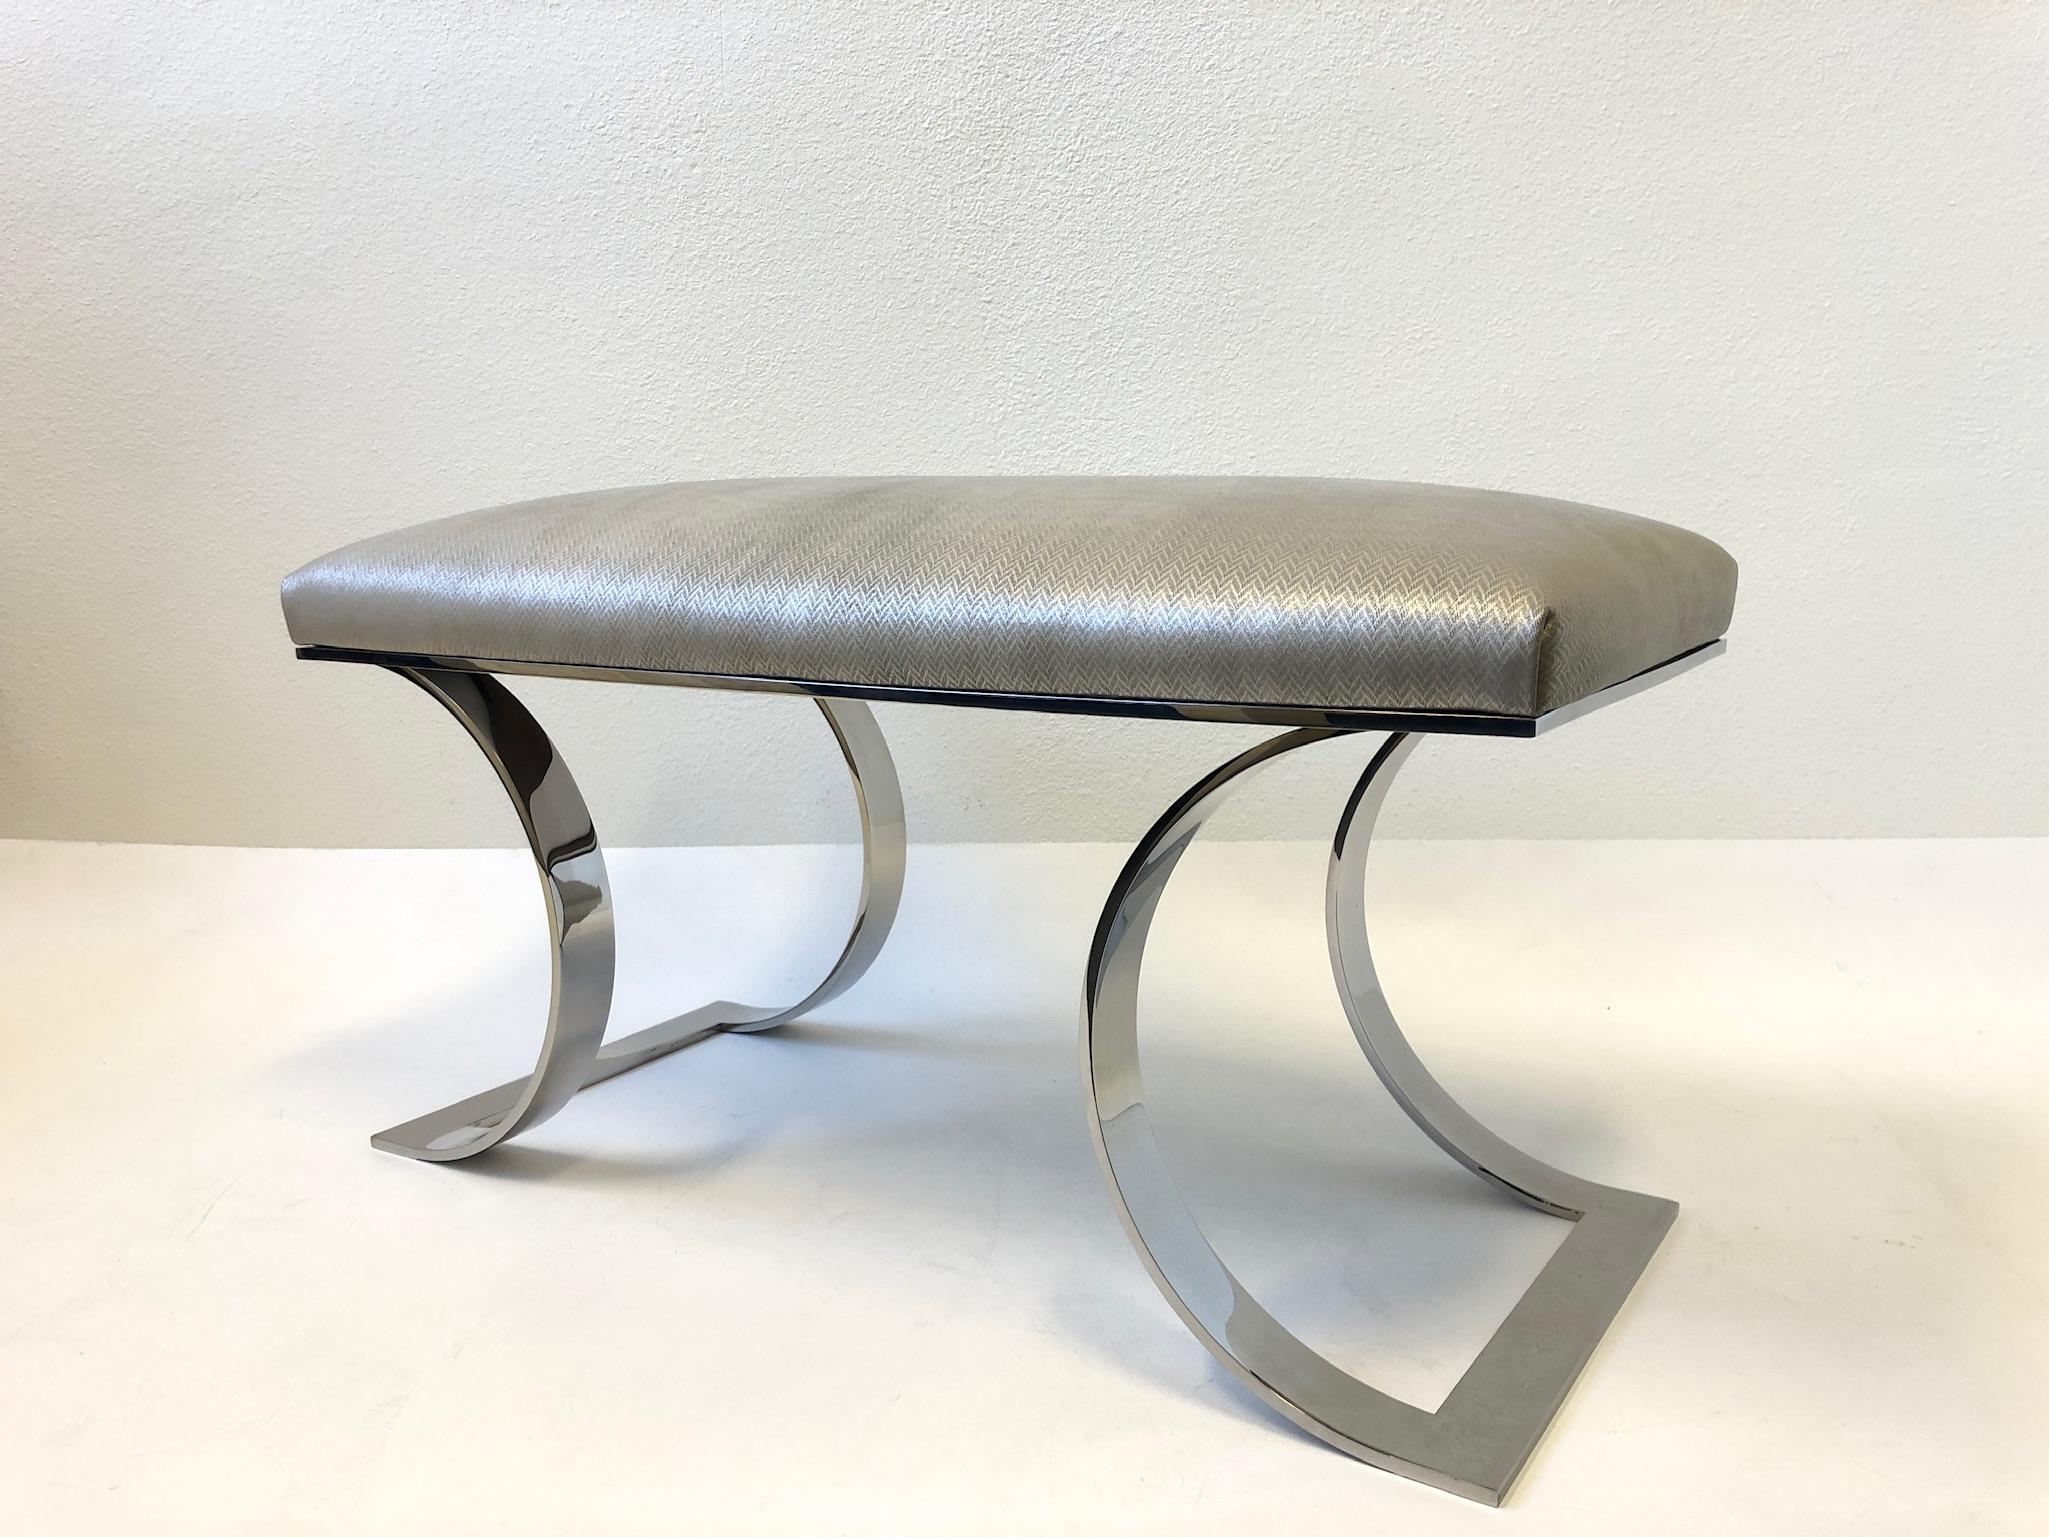 Late 20th Century Polish Stainless Steel and Leather “JMF Bench” by Karl Springer